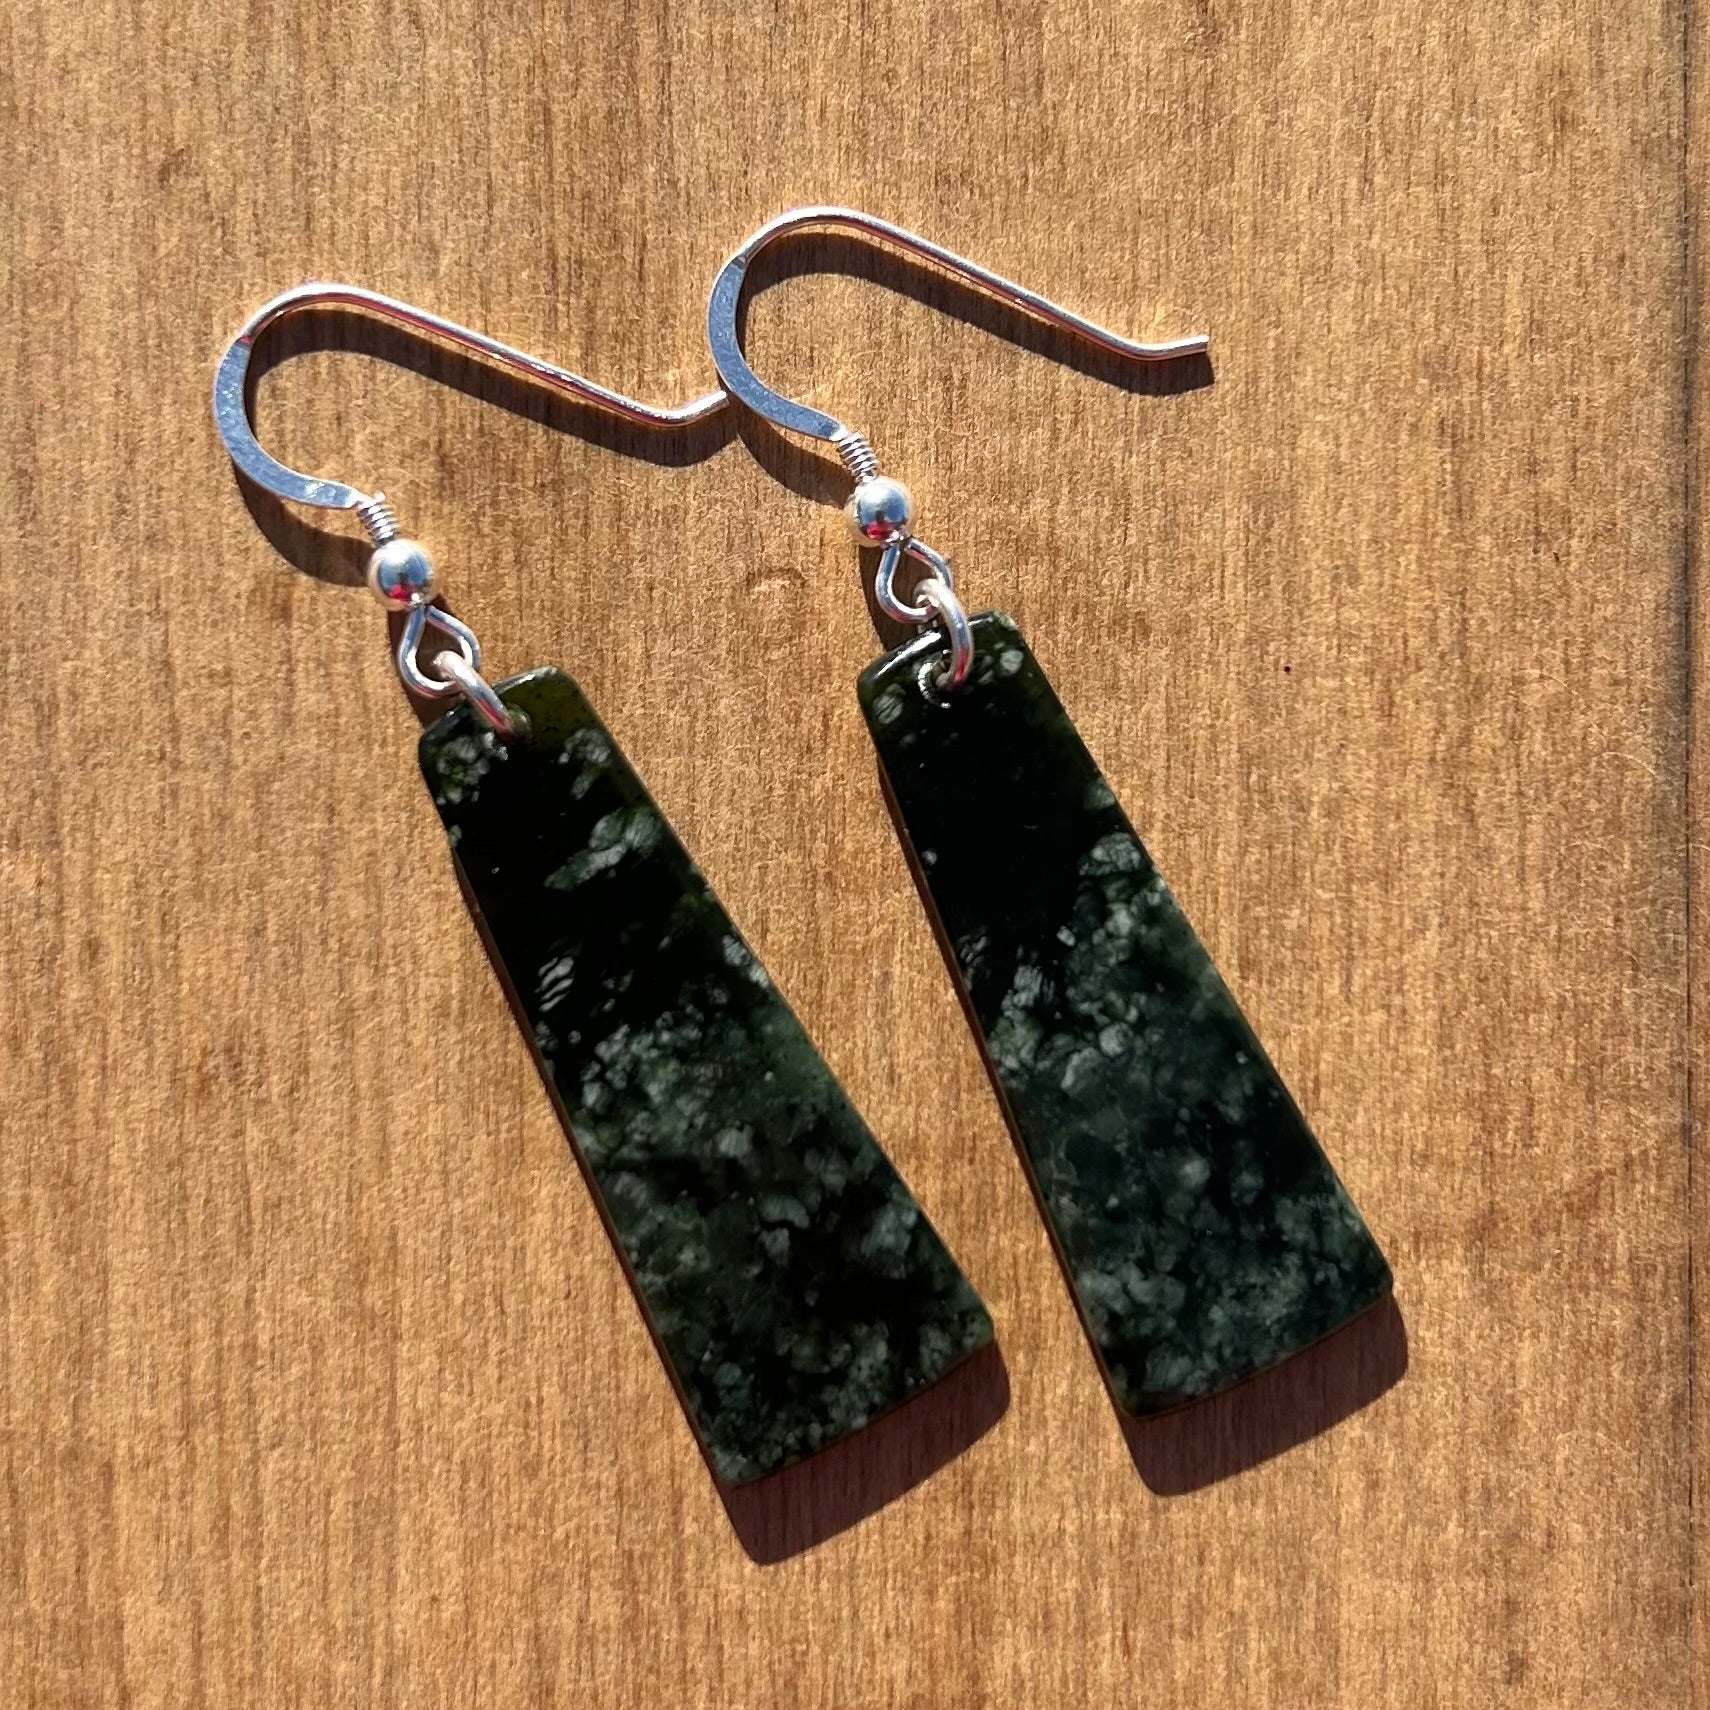 Pair of roimata (teardrop) earrings hand-carved from New Zealand pounamu (greenstone), with sterling silver fittings. Back.